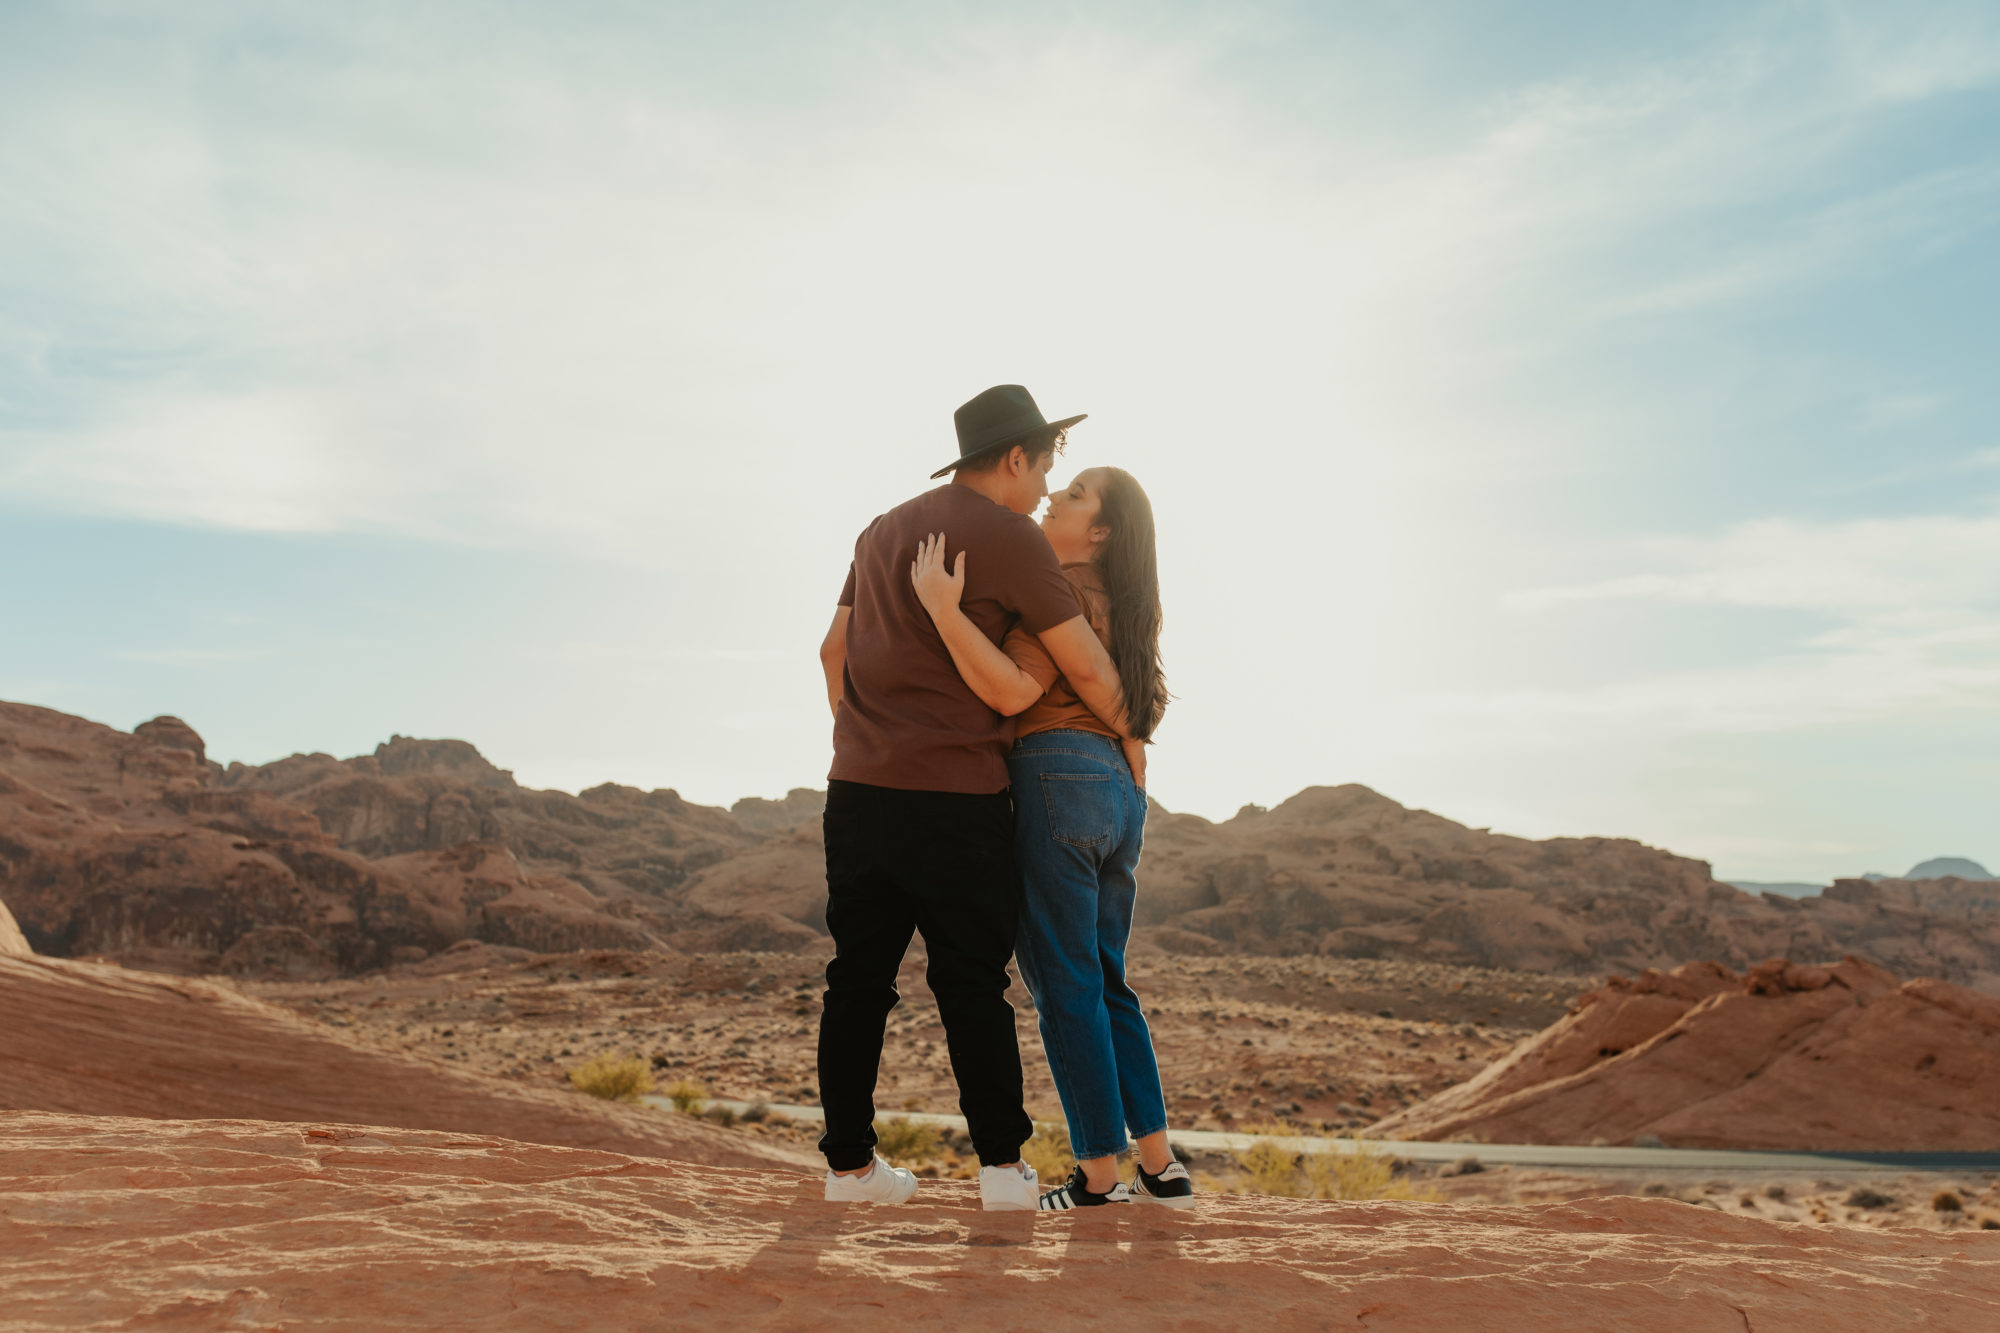 Sweet couple looking out into the sunset in the desert